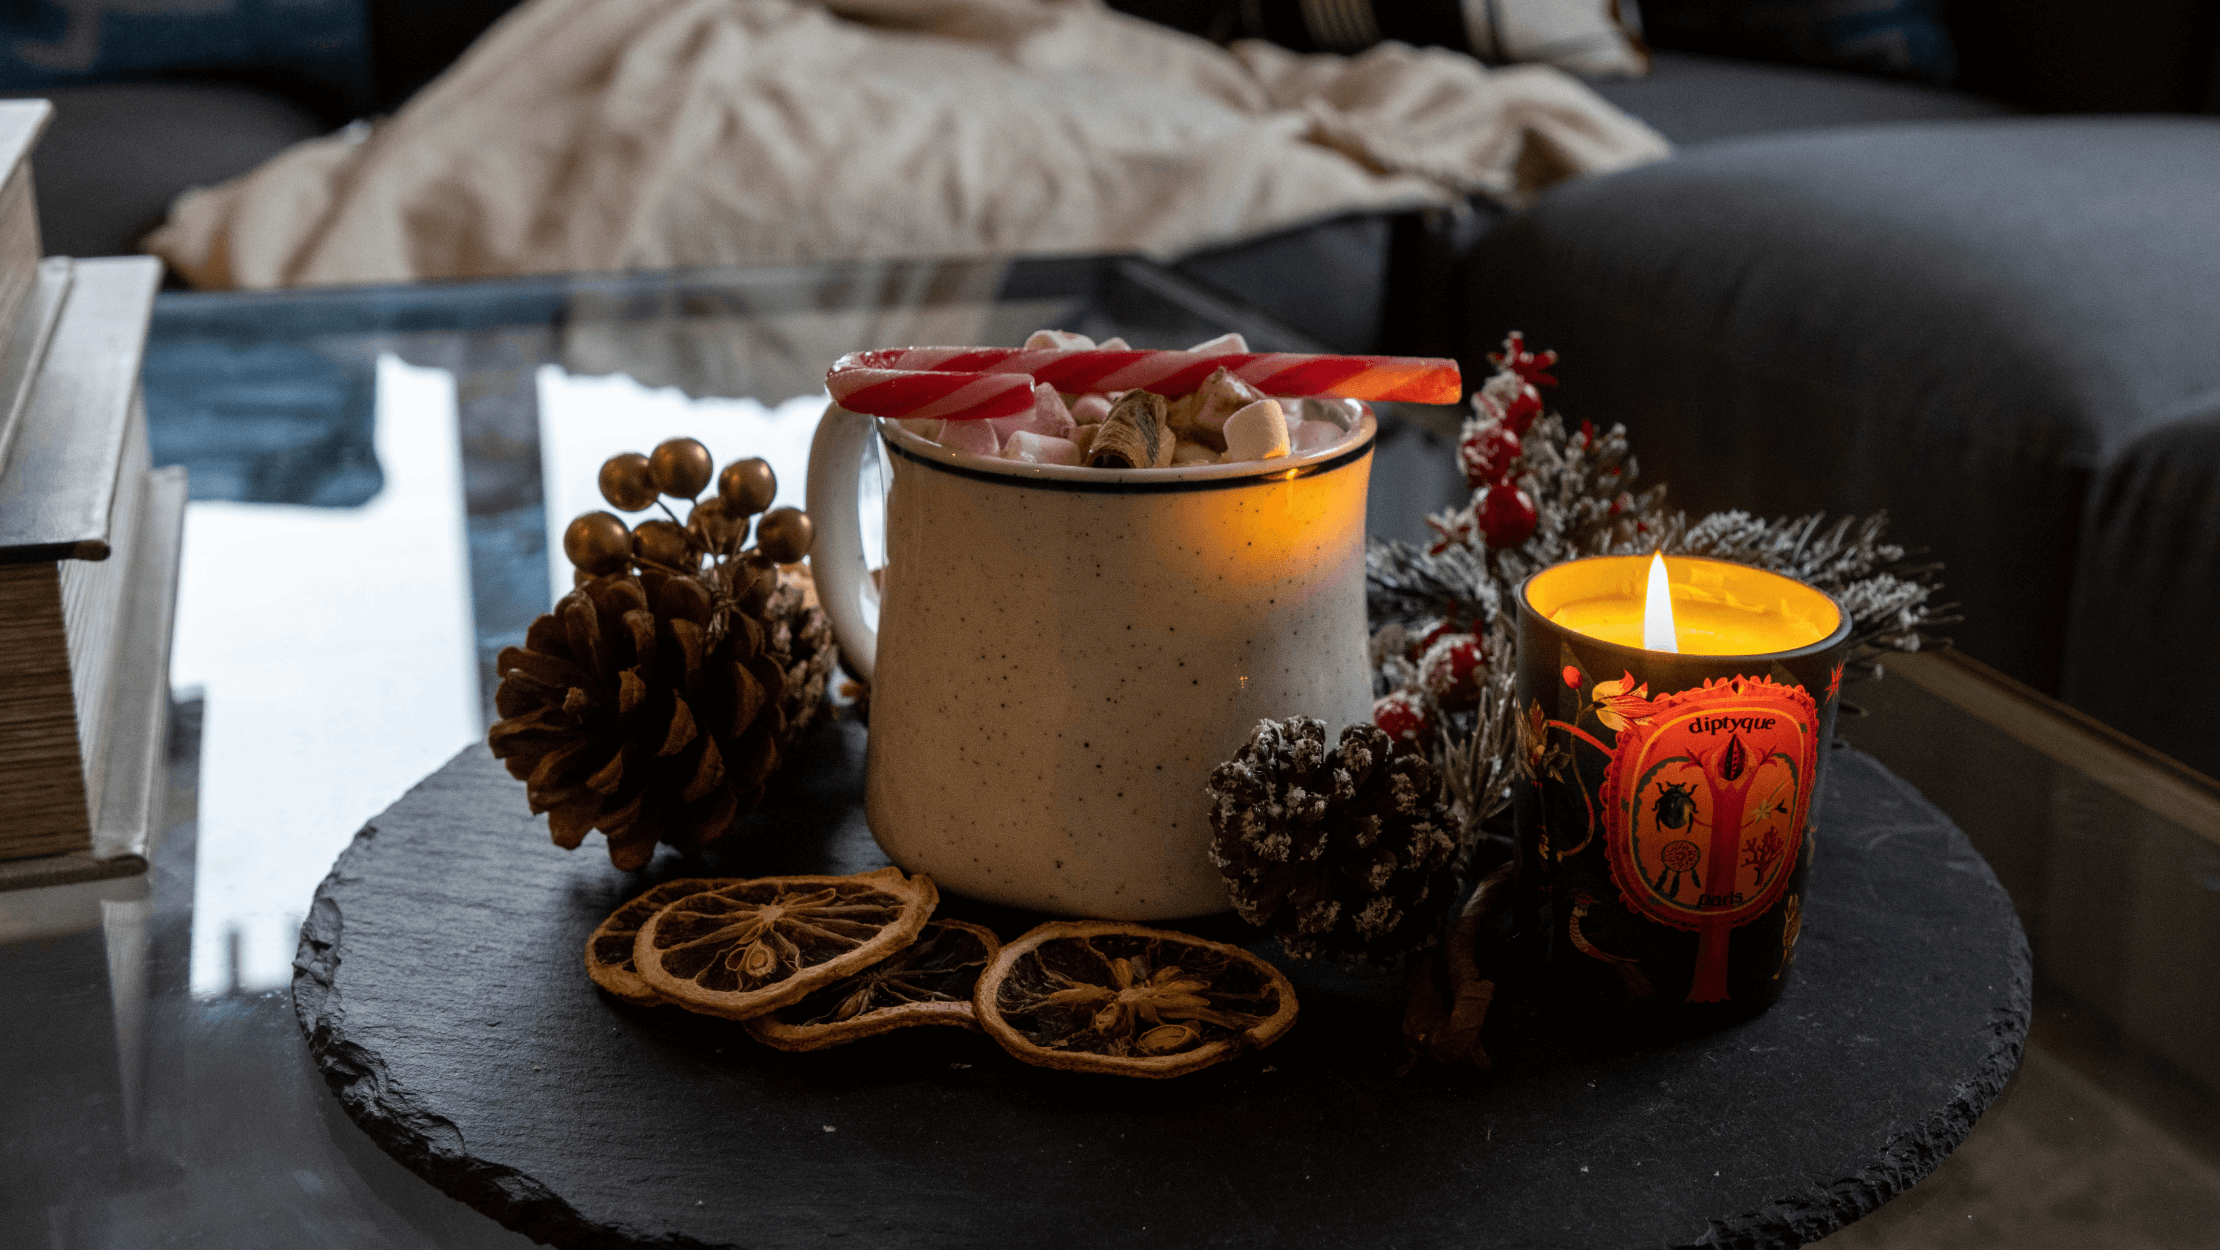 7 Ways to Make Your Home Cosy This Winter